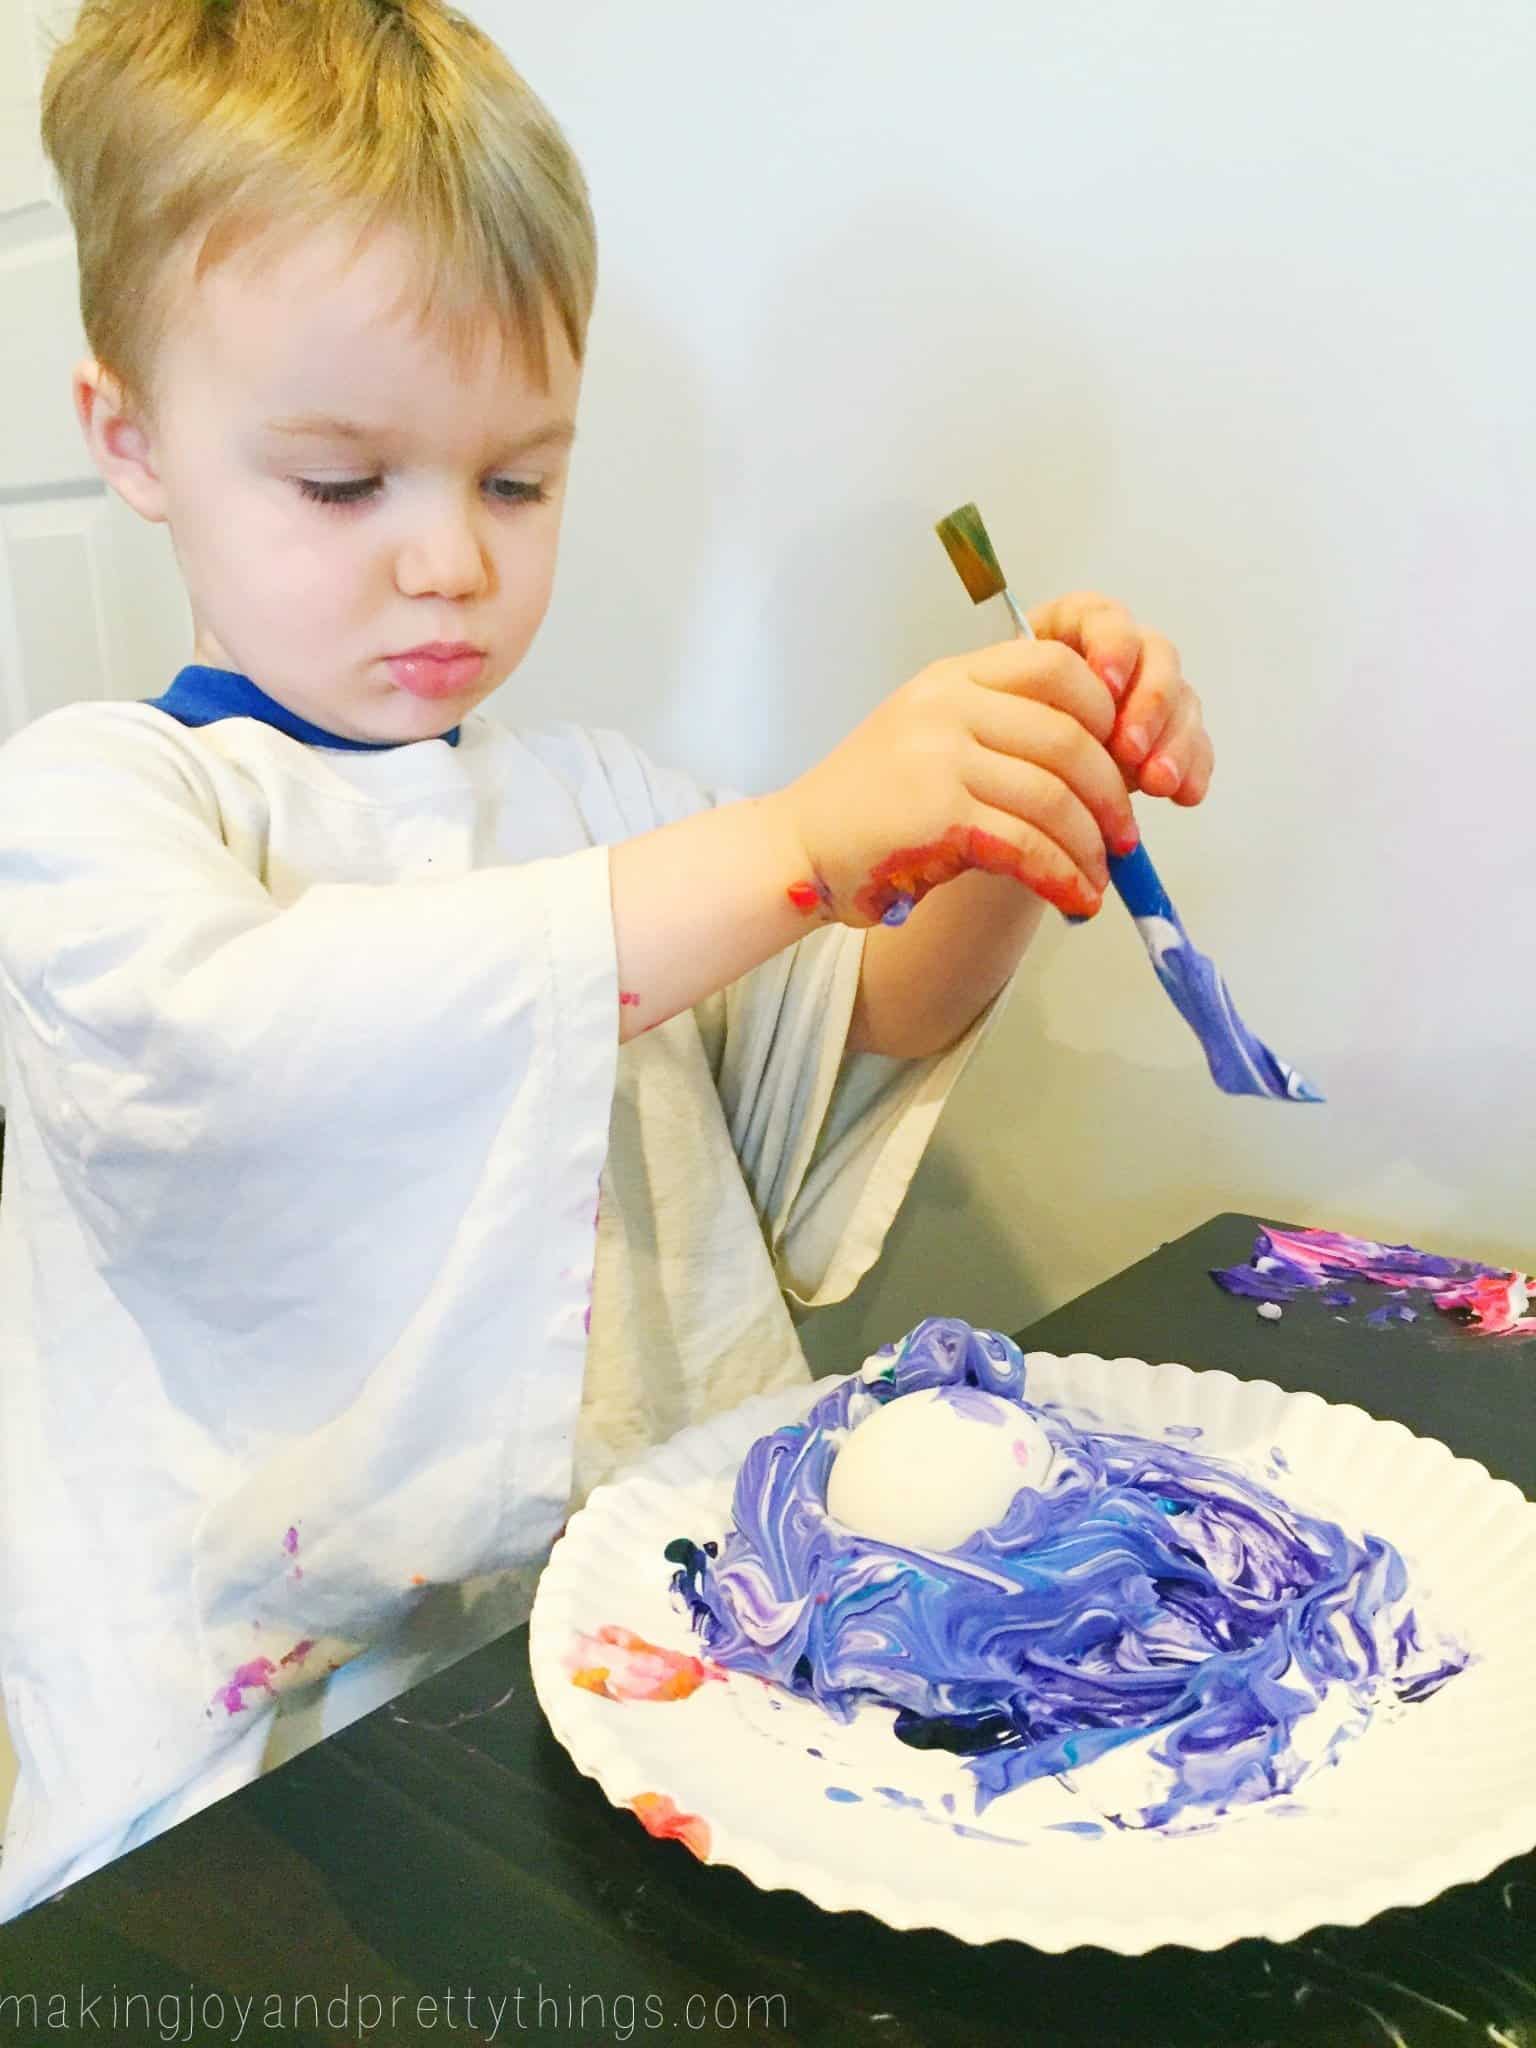 A little boy holds a paint brush and covers a single egg with a pile of blue-dyed shaving cream.